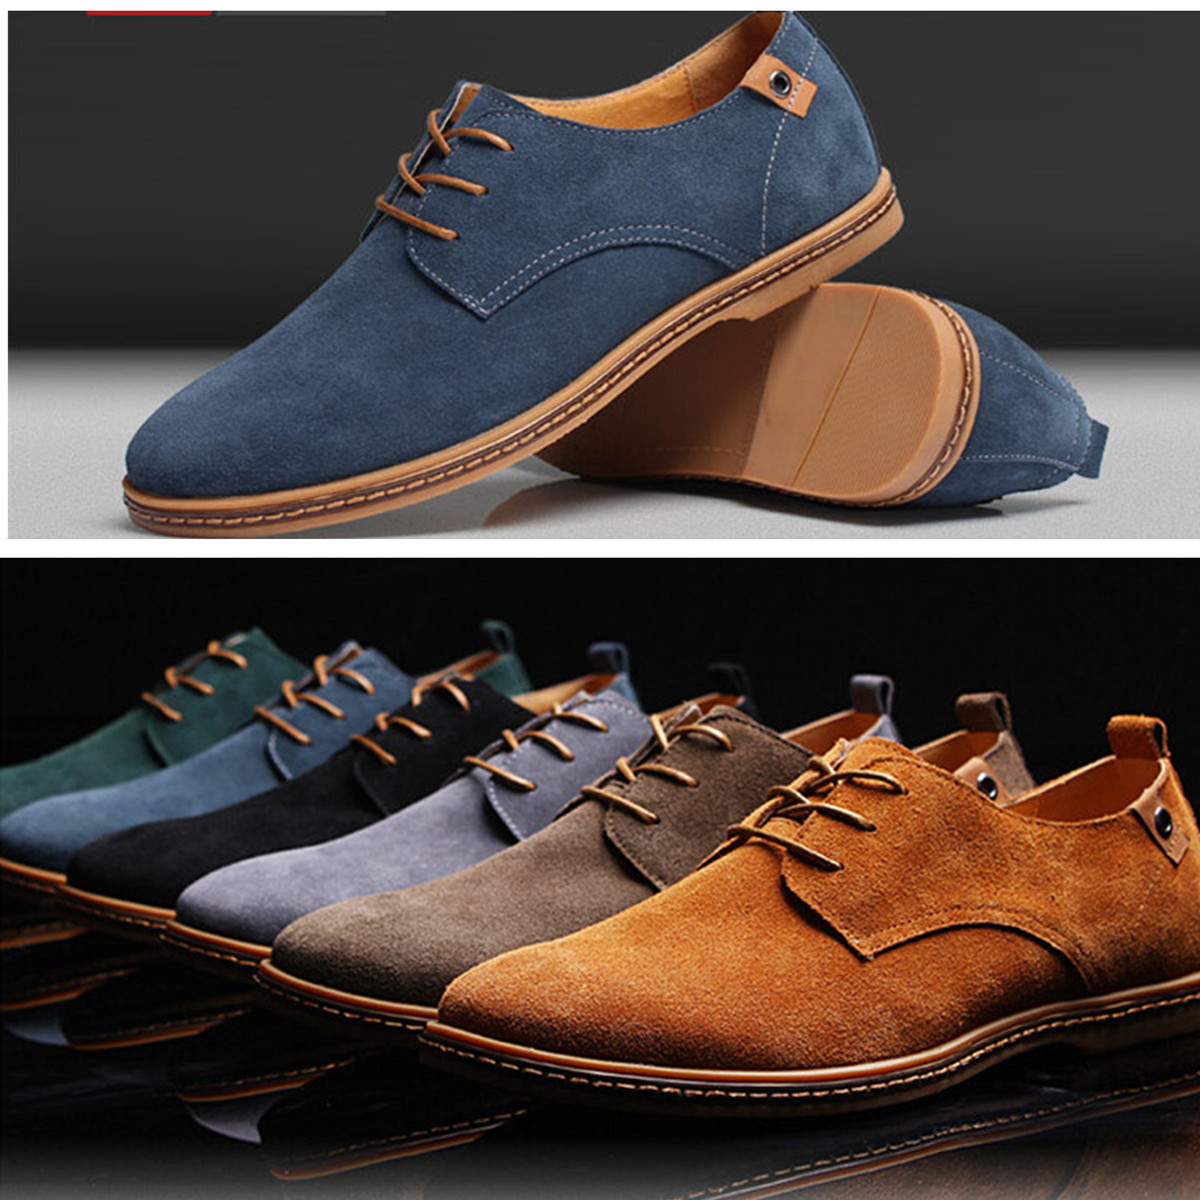 2017 UK Men Lace up Oxfords Casual Suede European style leather Shoes ...